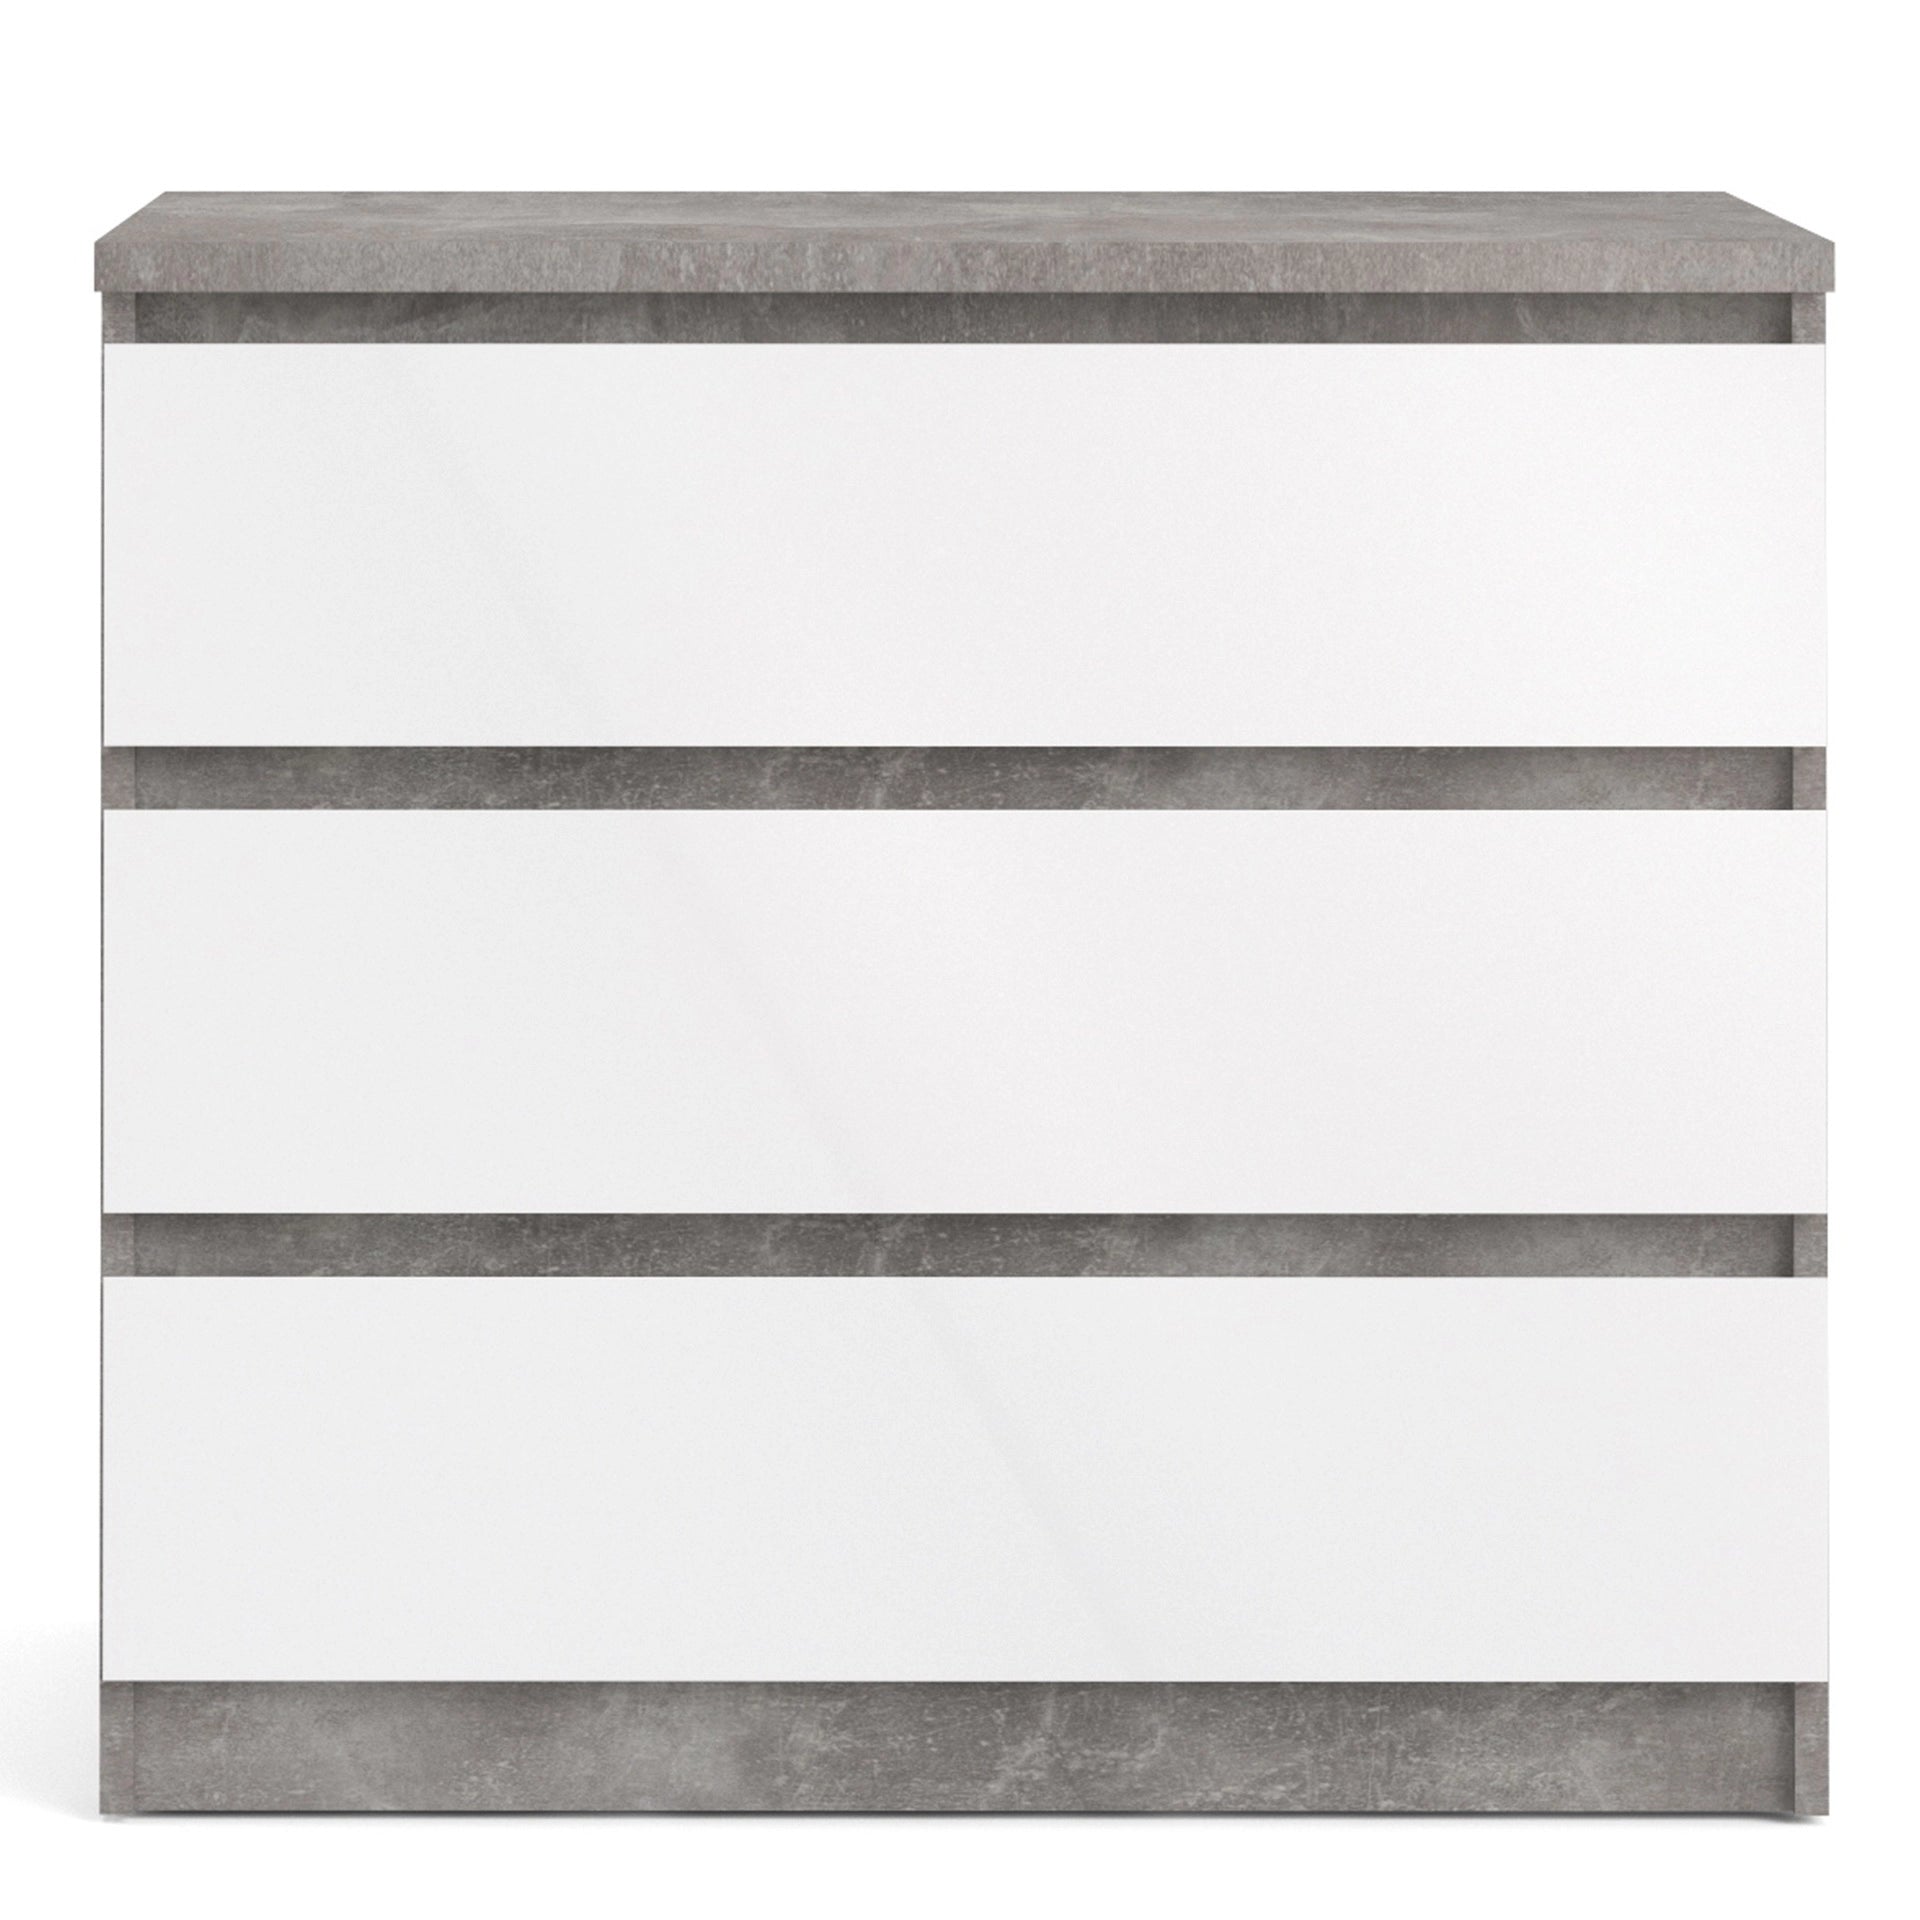 Furniture To Go Naia Chest of 3 Drawers in Concrete & White High Gloss